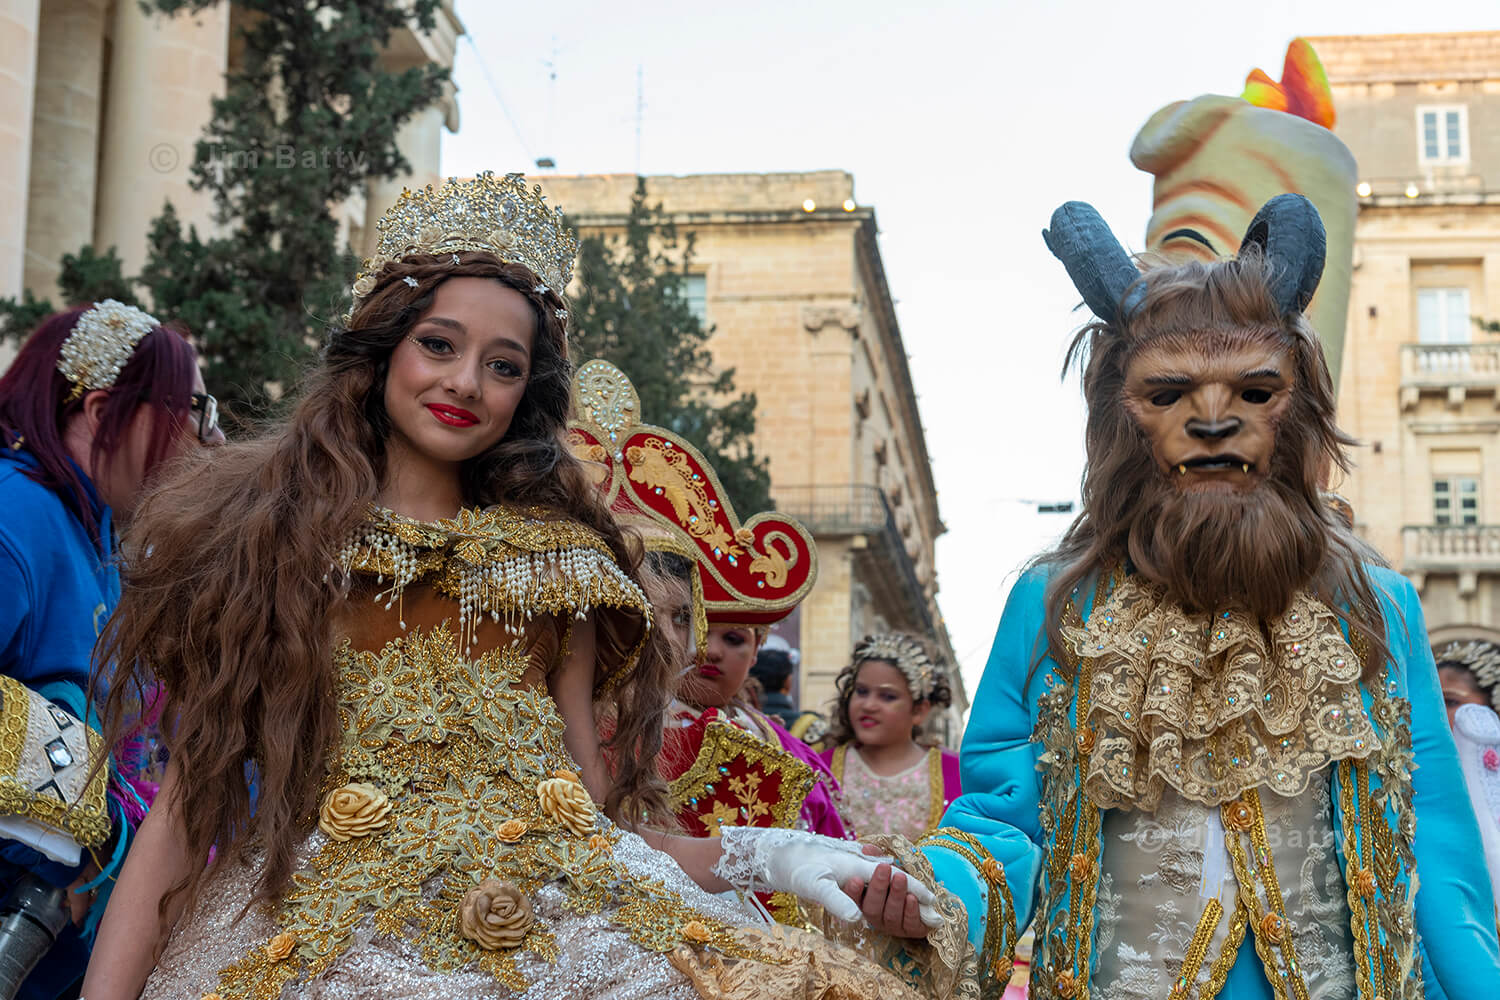 A couple dressed as Beauty and the Beast as part of the Valetta Carnival procession